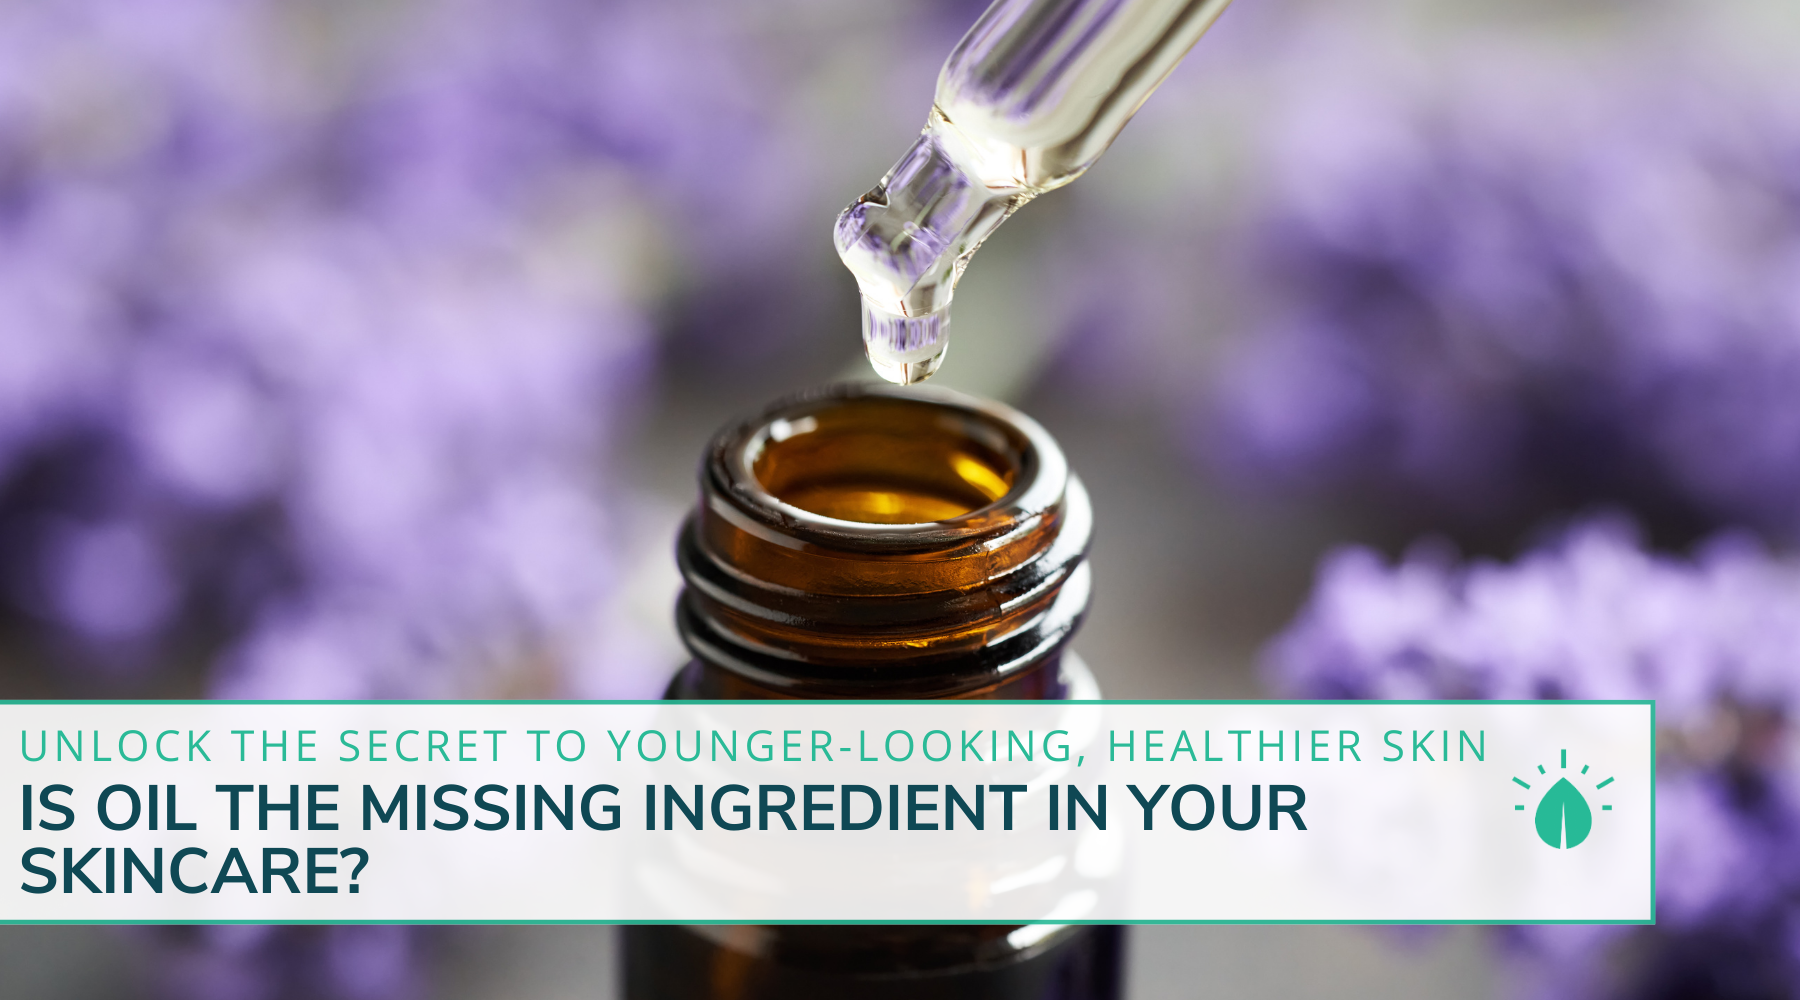 Is Oil the Missing Ingredient in Your Skincare?